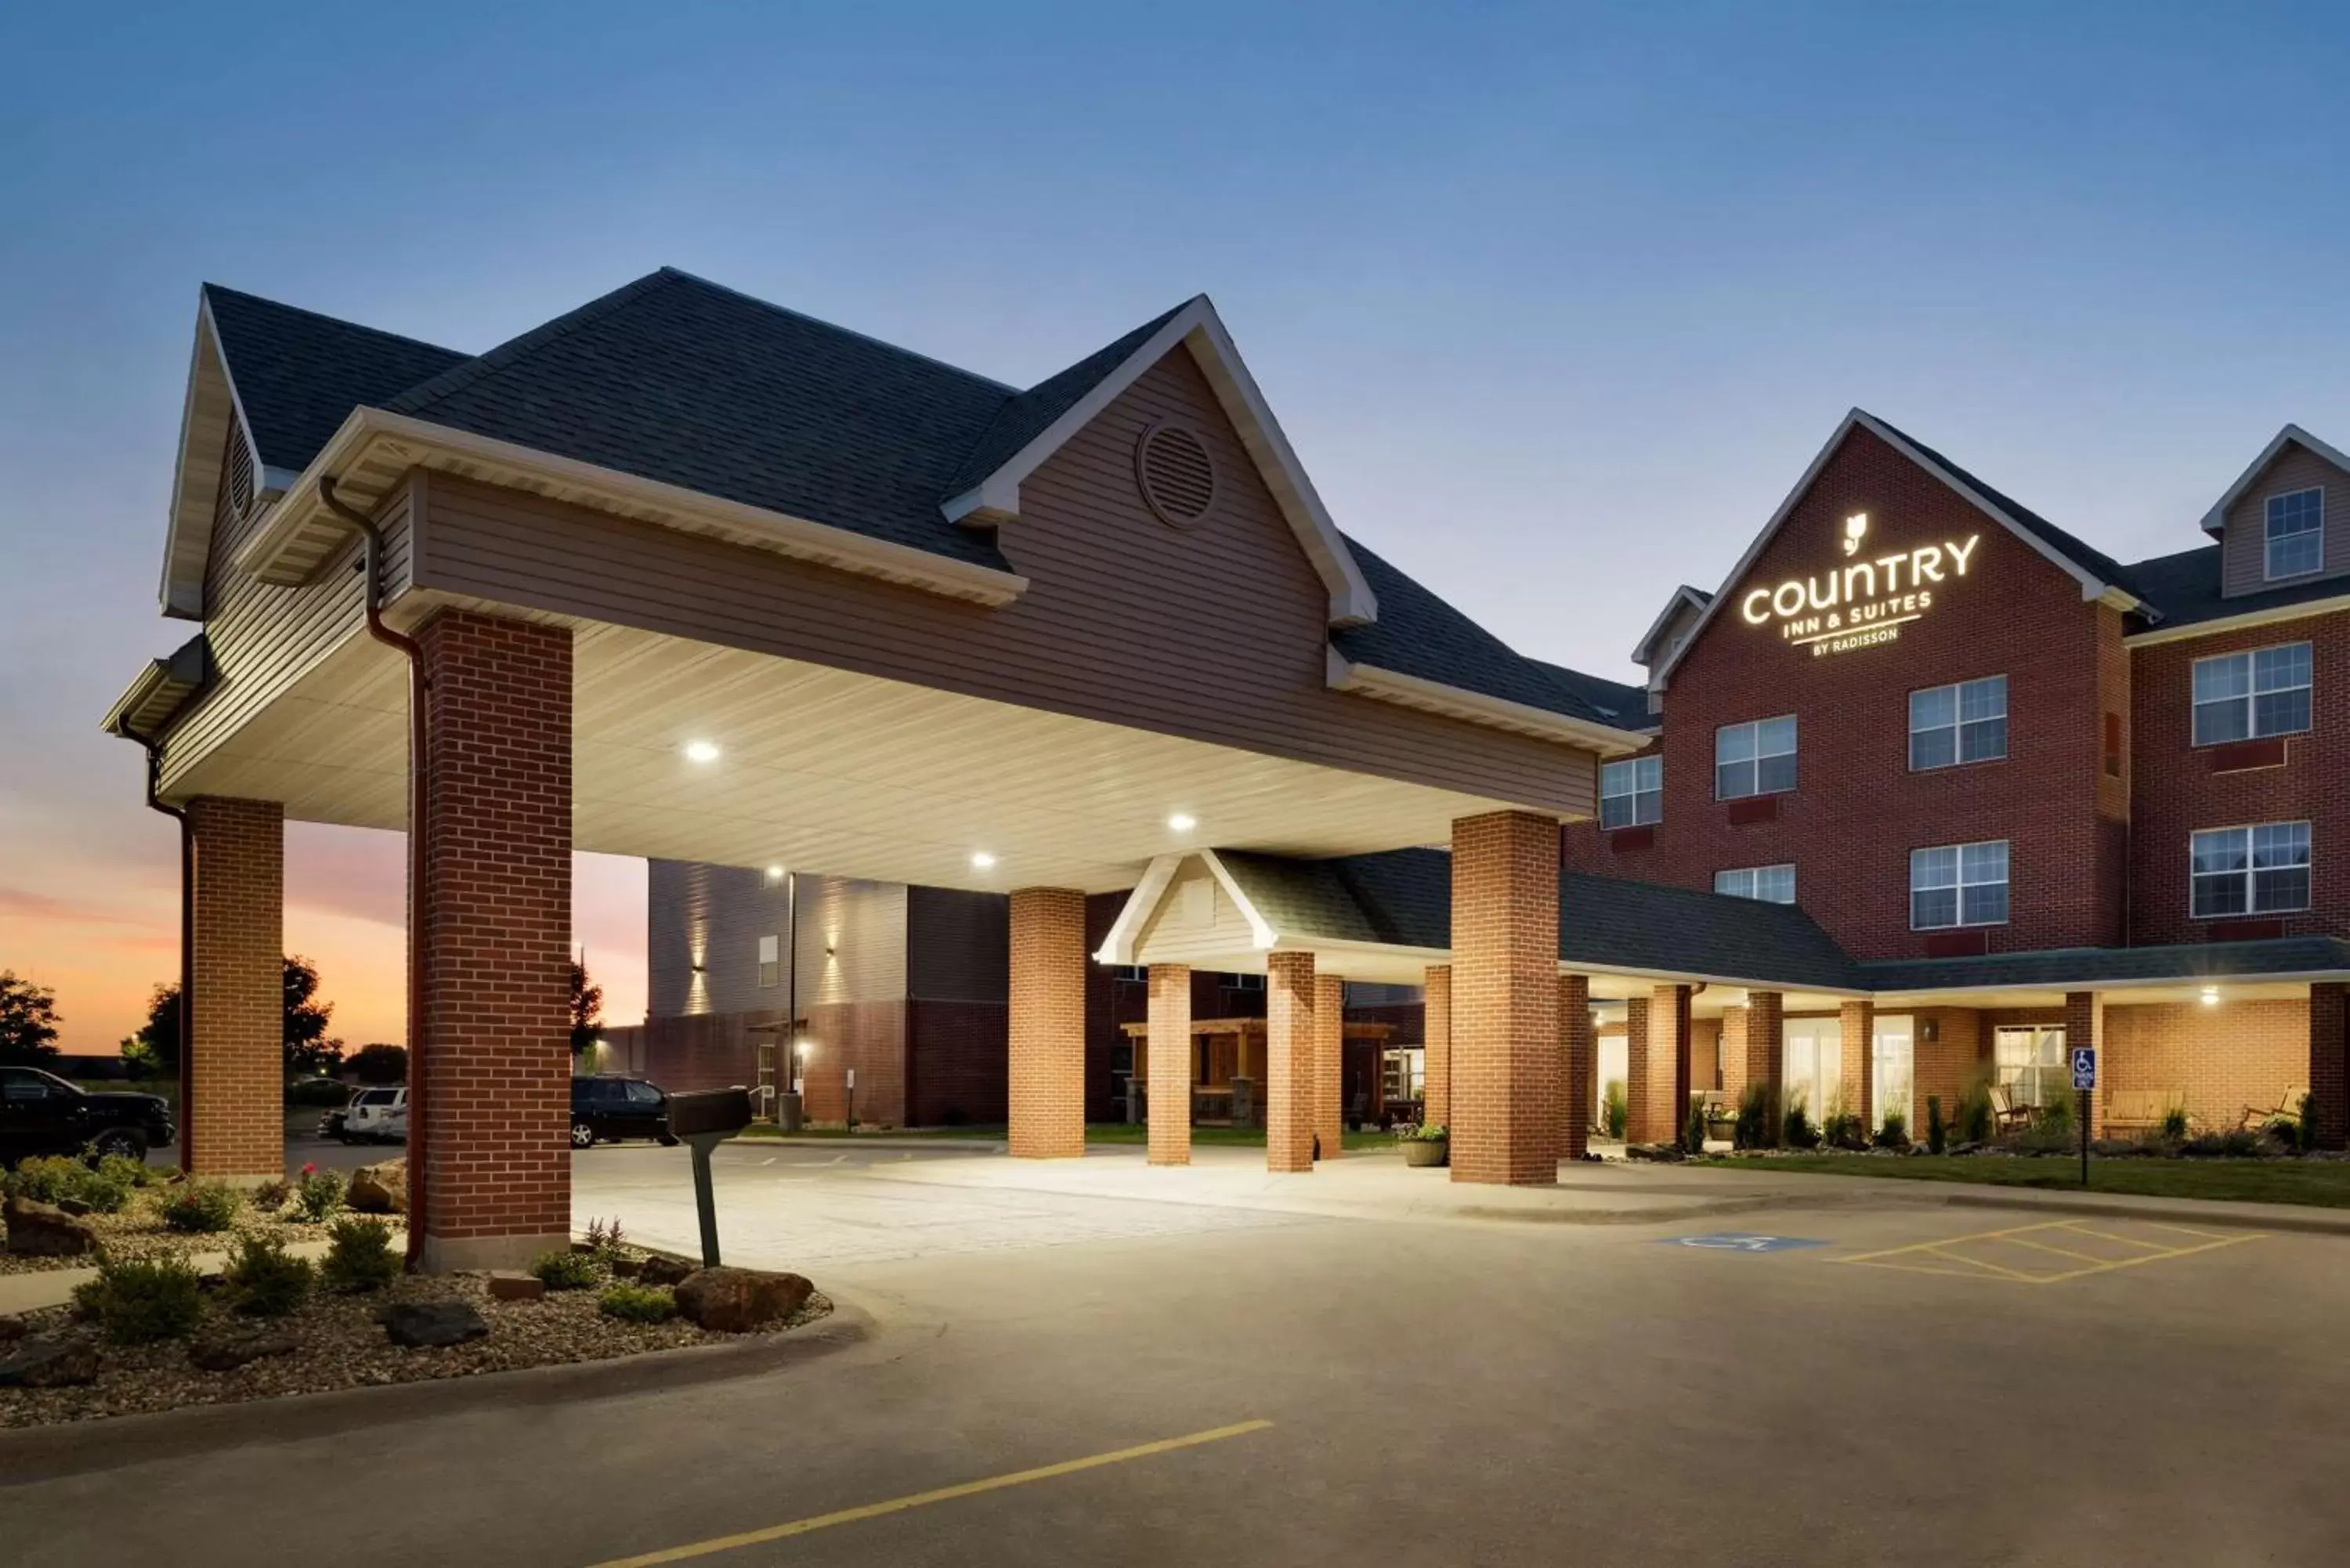 Property building in Country Inn & Suites by Radisson, Coralville, IA